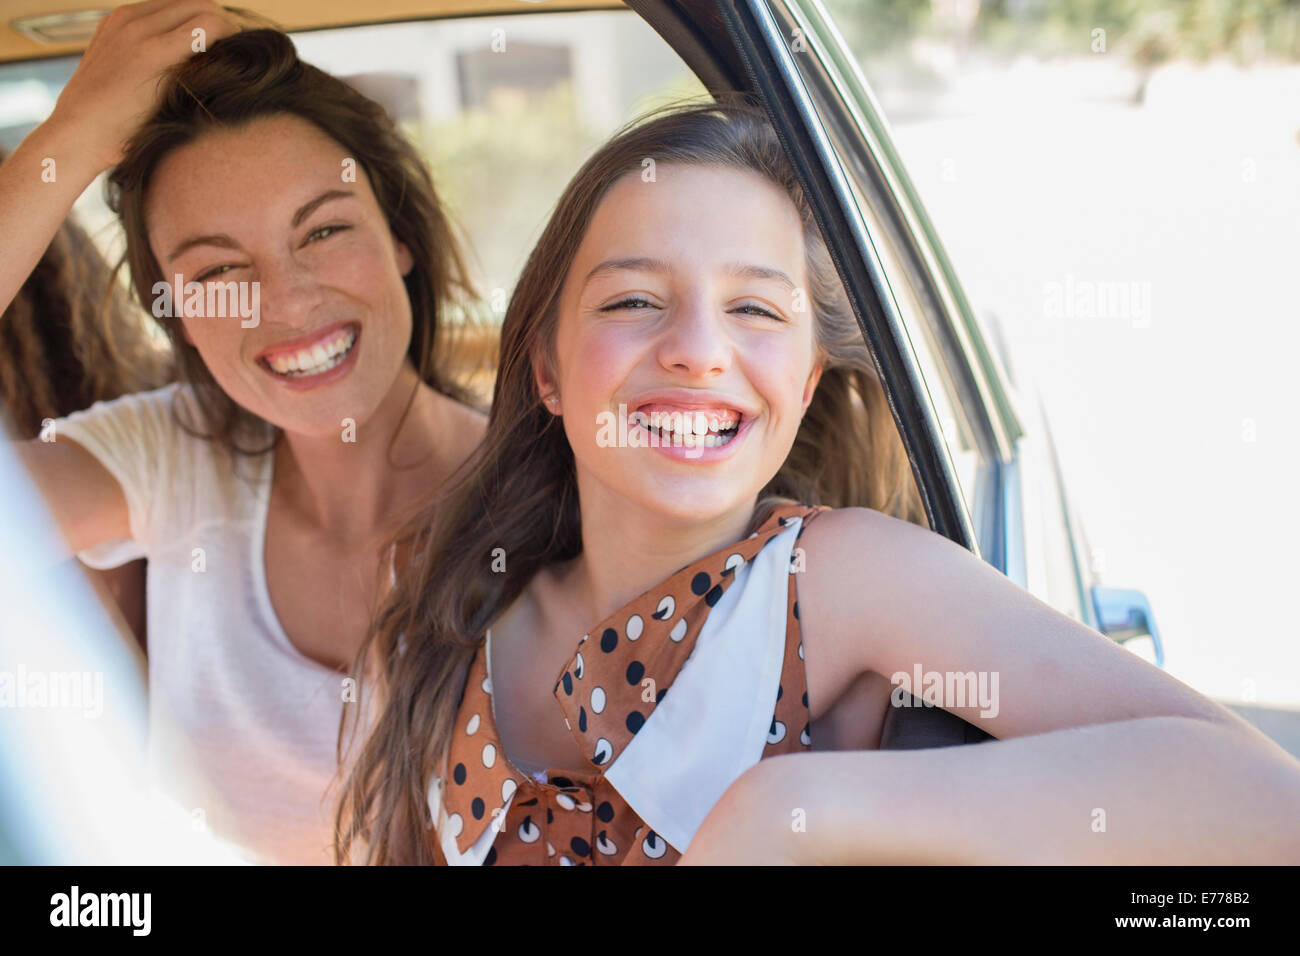 Sisters laughing in car backseat Stock Photo